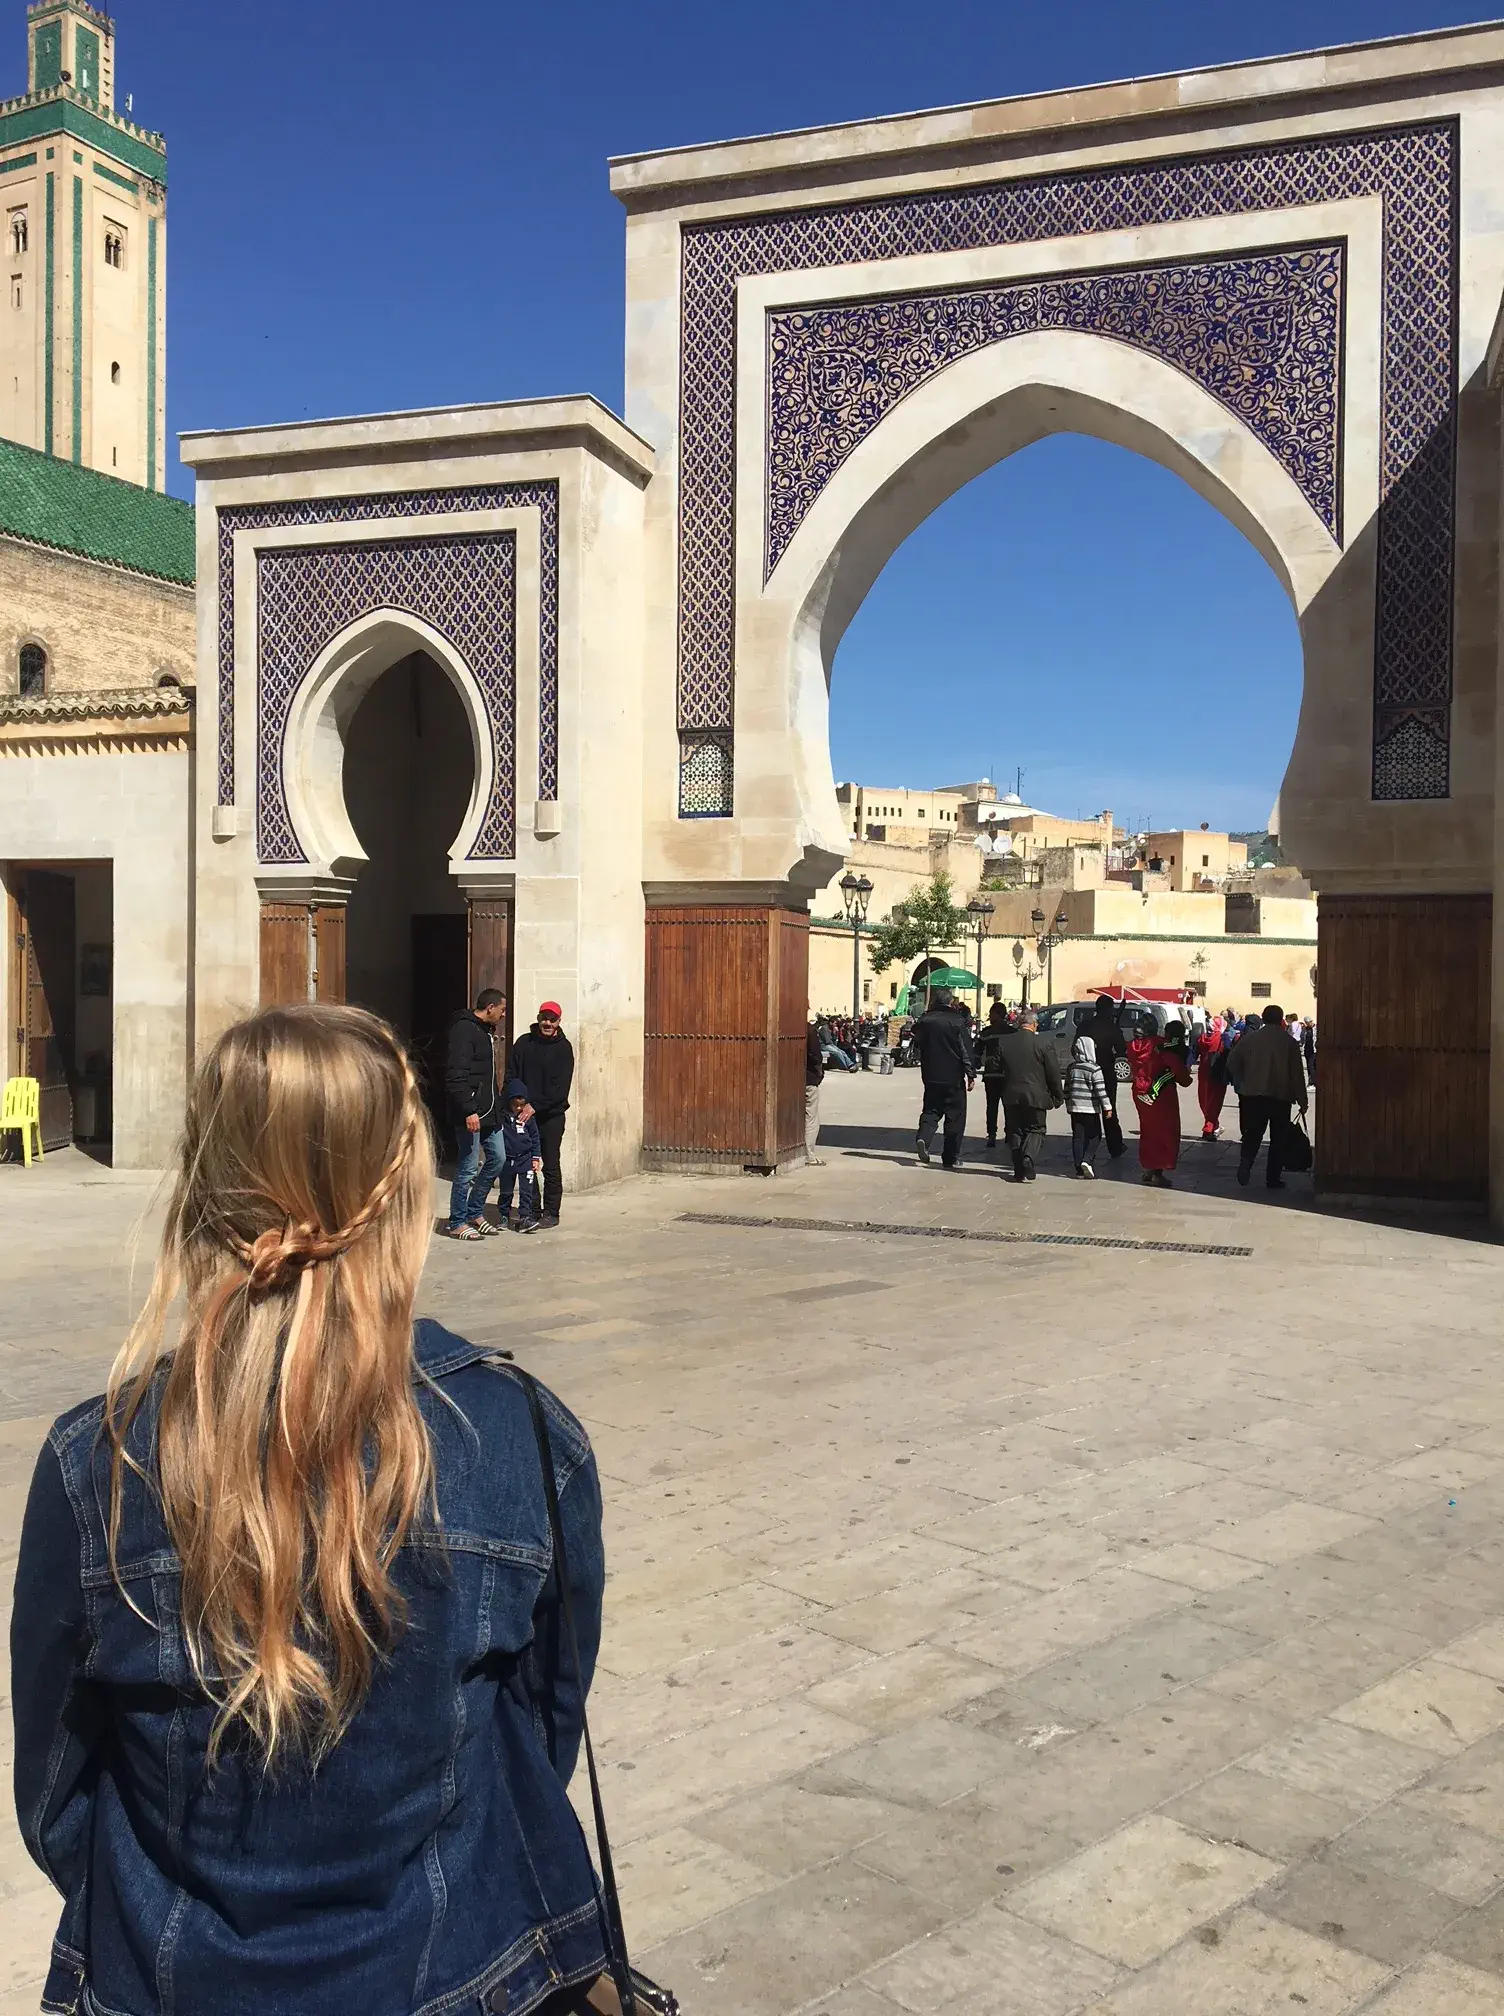 Tours from Fes